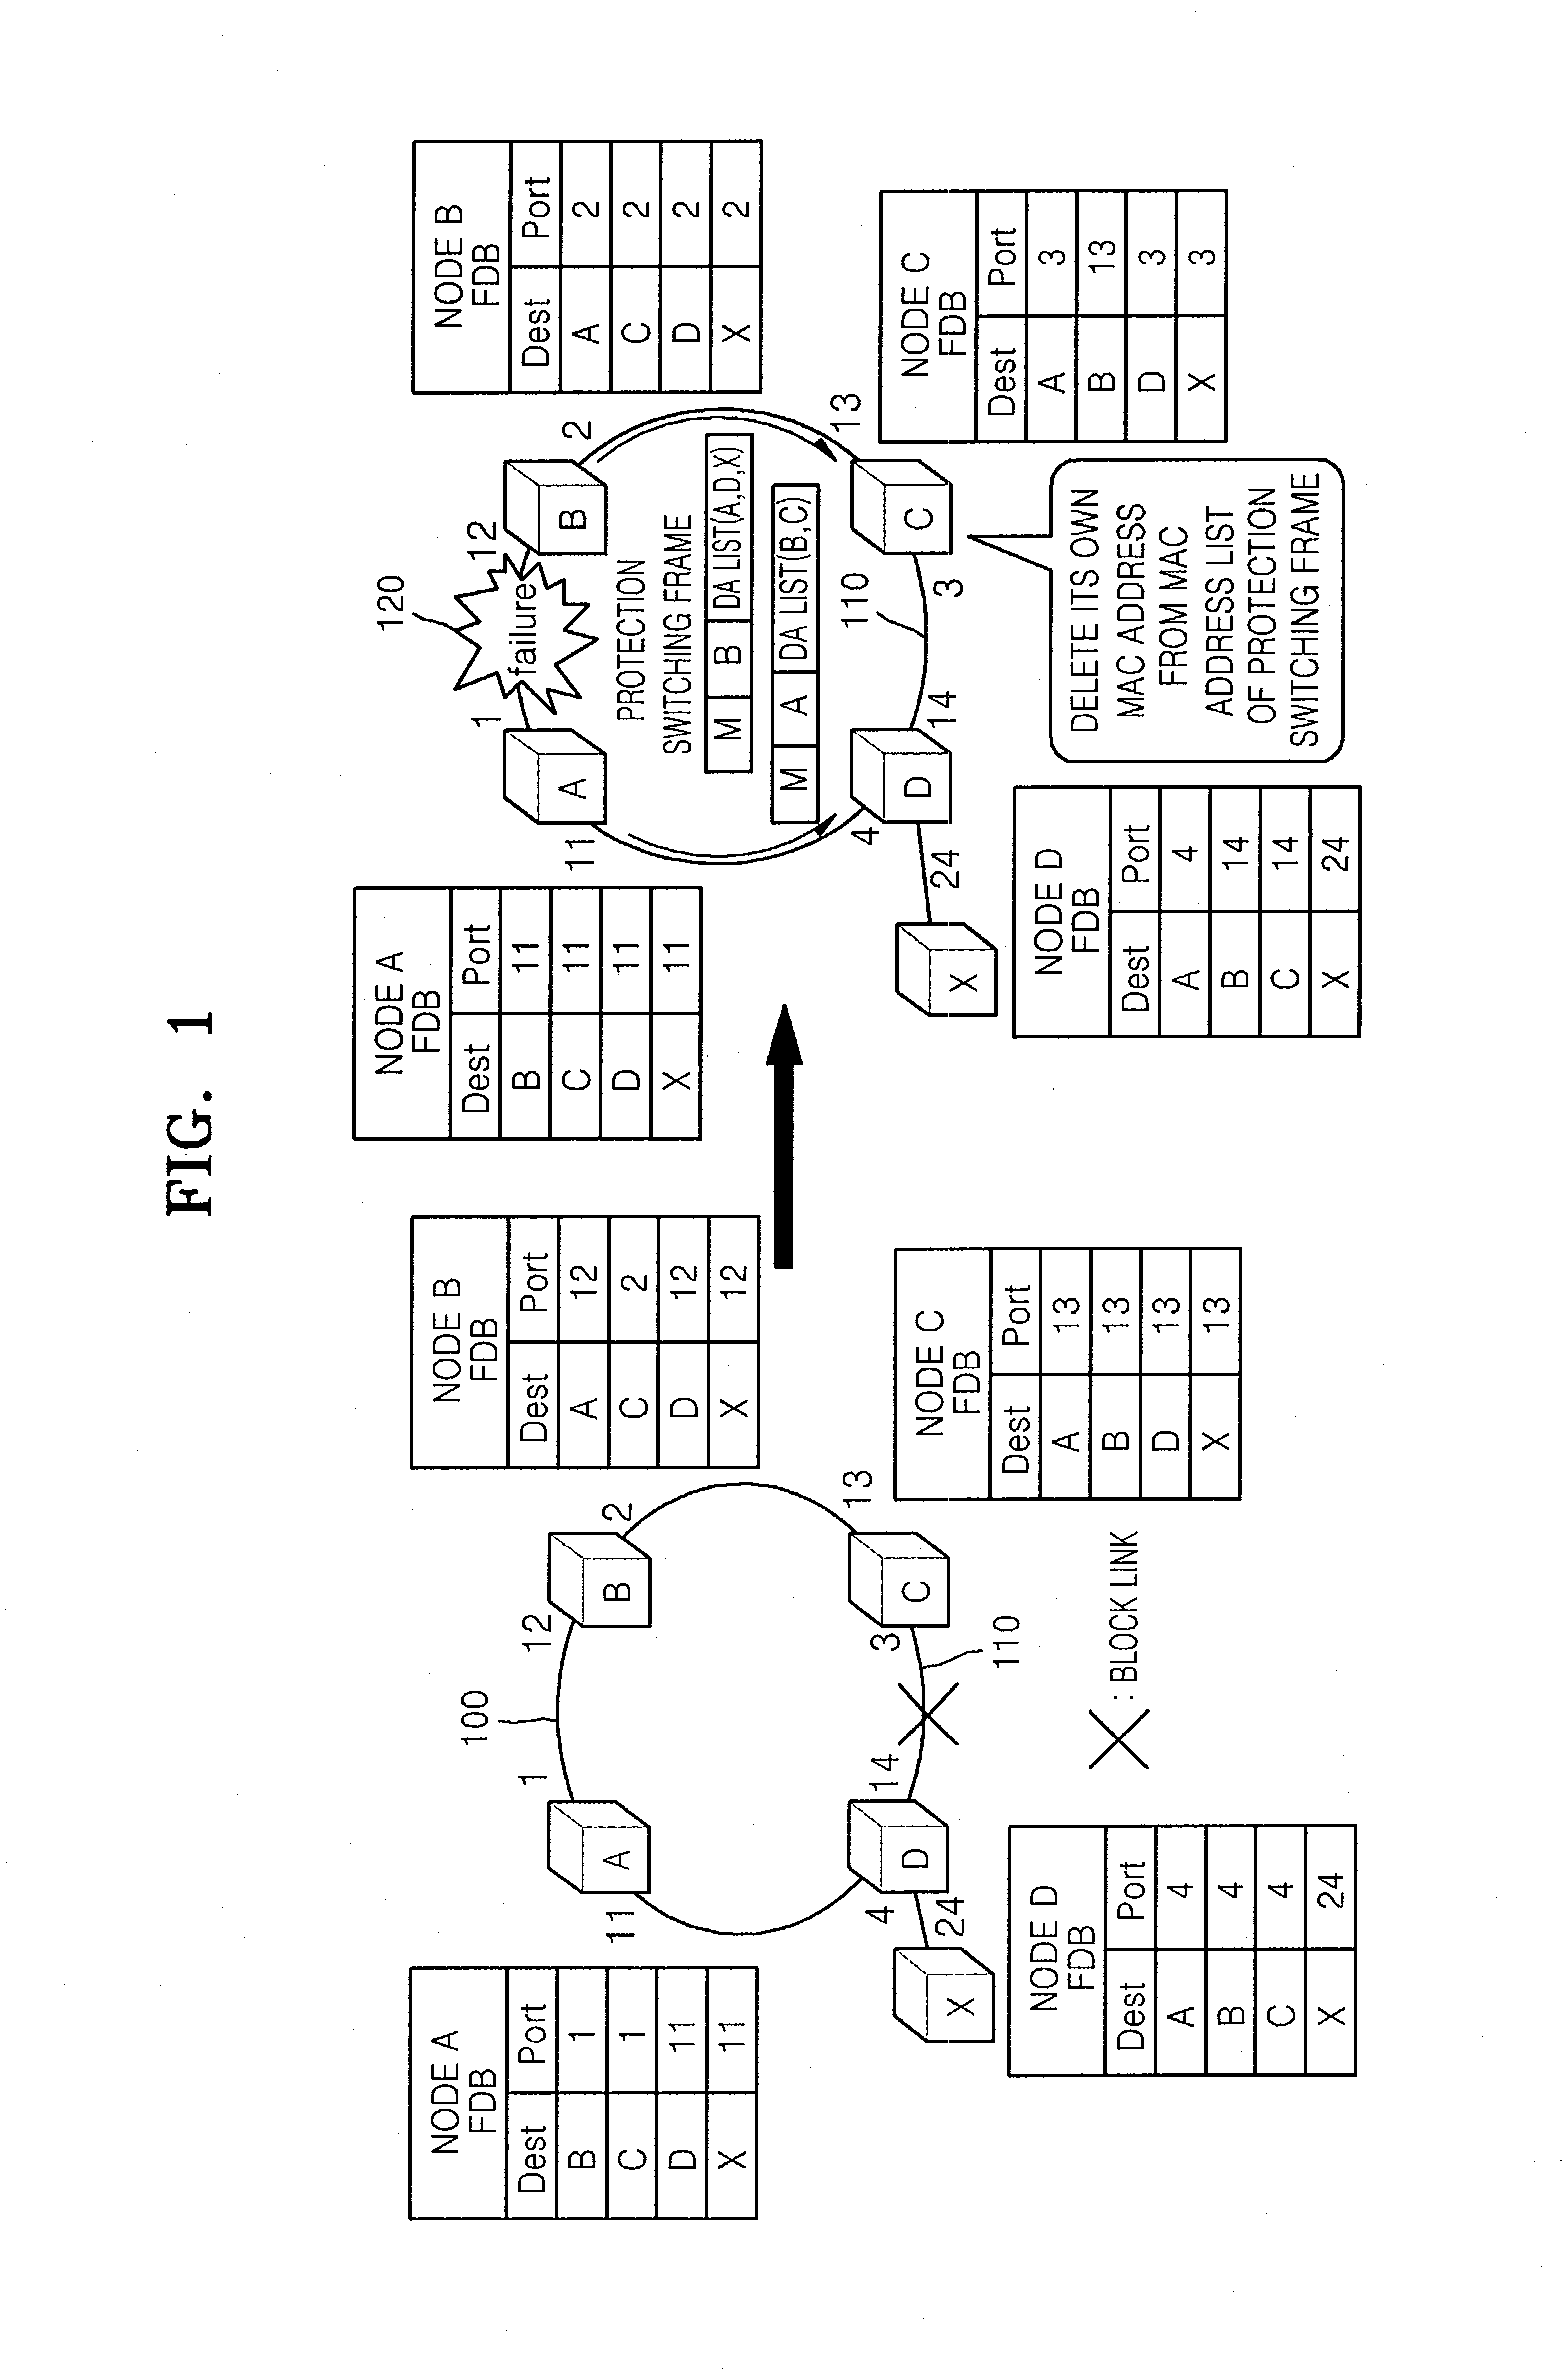 Method for protection switching in ethernet ring network